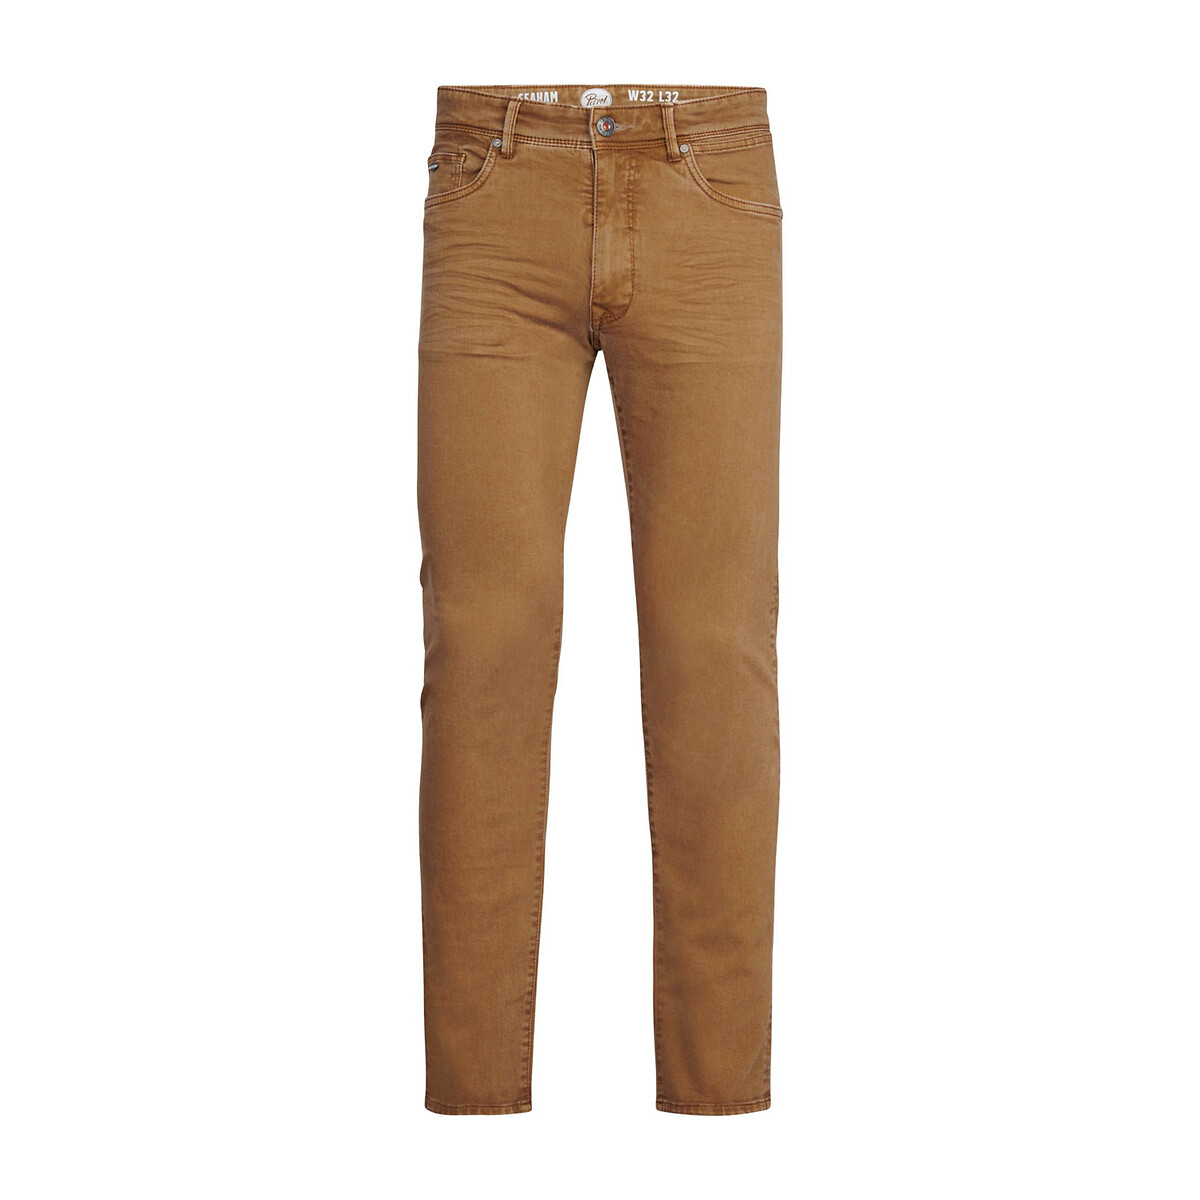 Seaham Slim Fit Jeans in Mid Rise